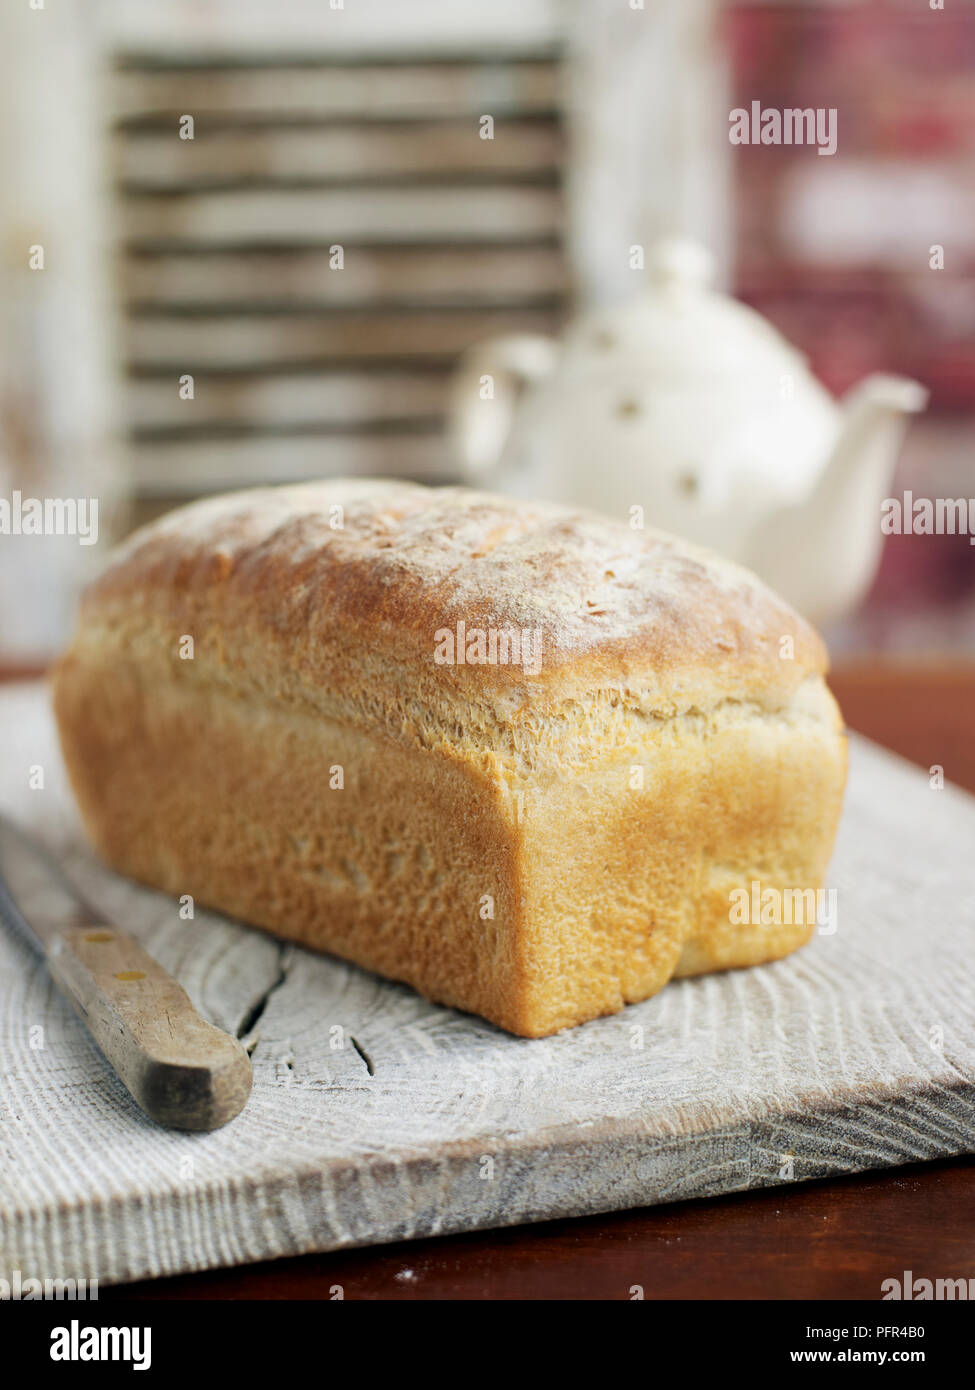 Loaf of bread on wooden board Stock Photo